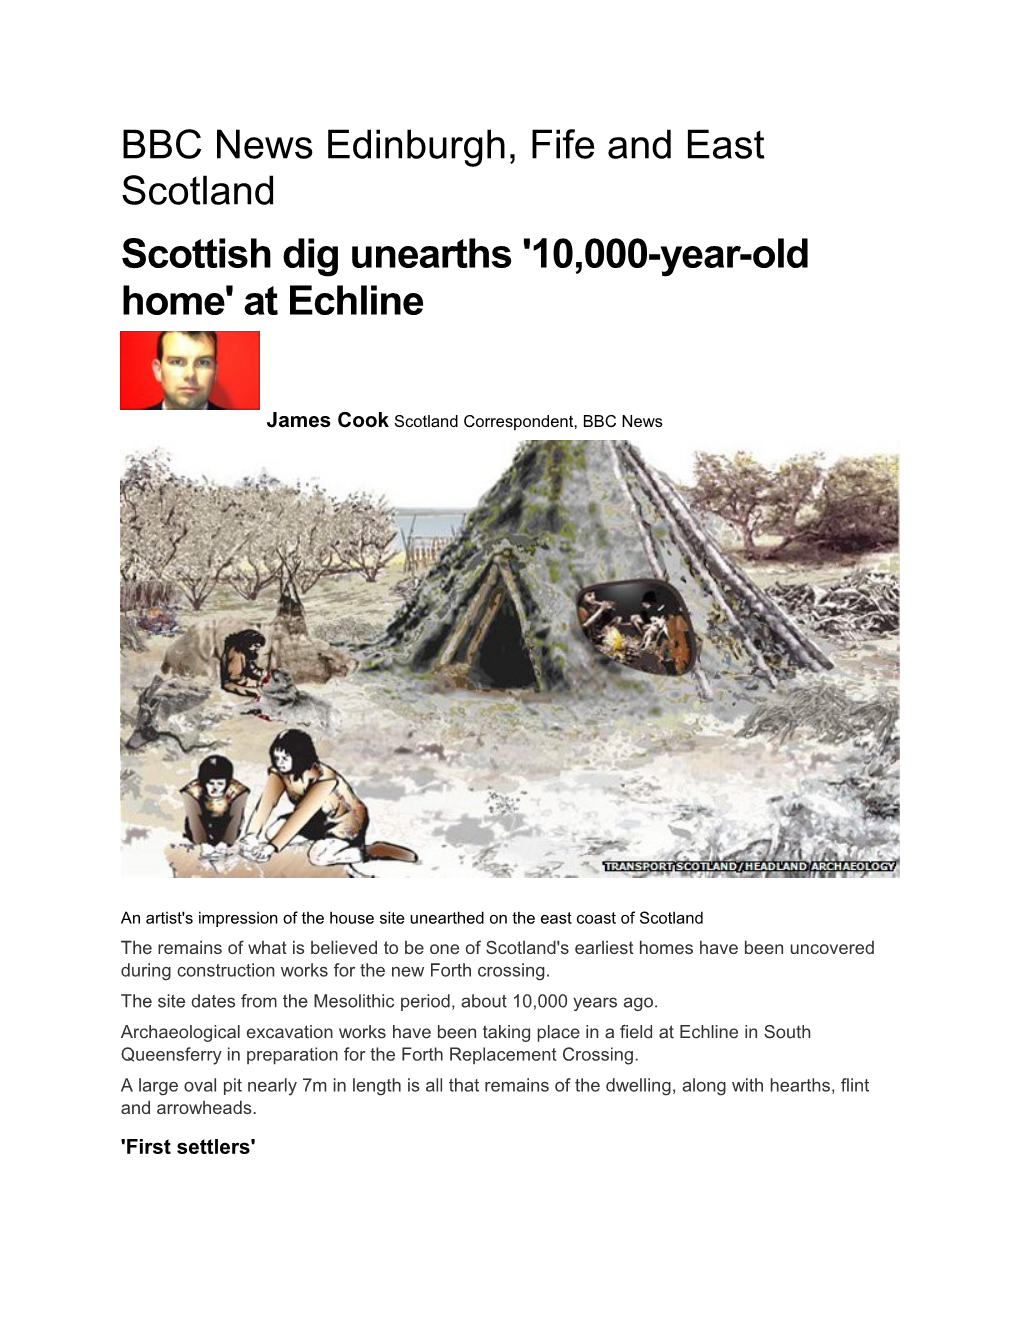 Scottish Dig Unearths '10,000-Year-Old Home' at Echline